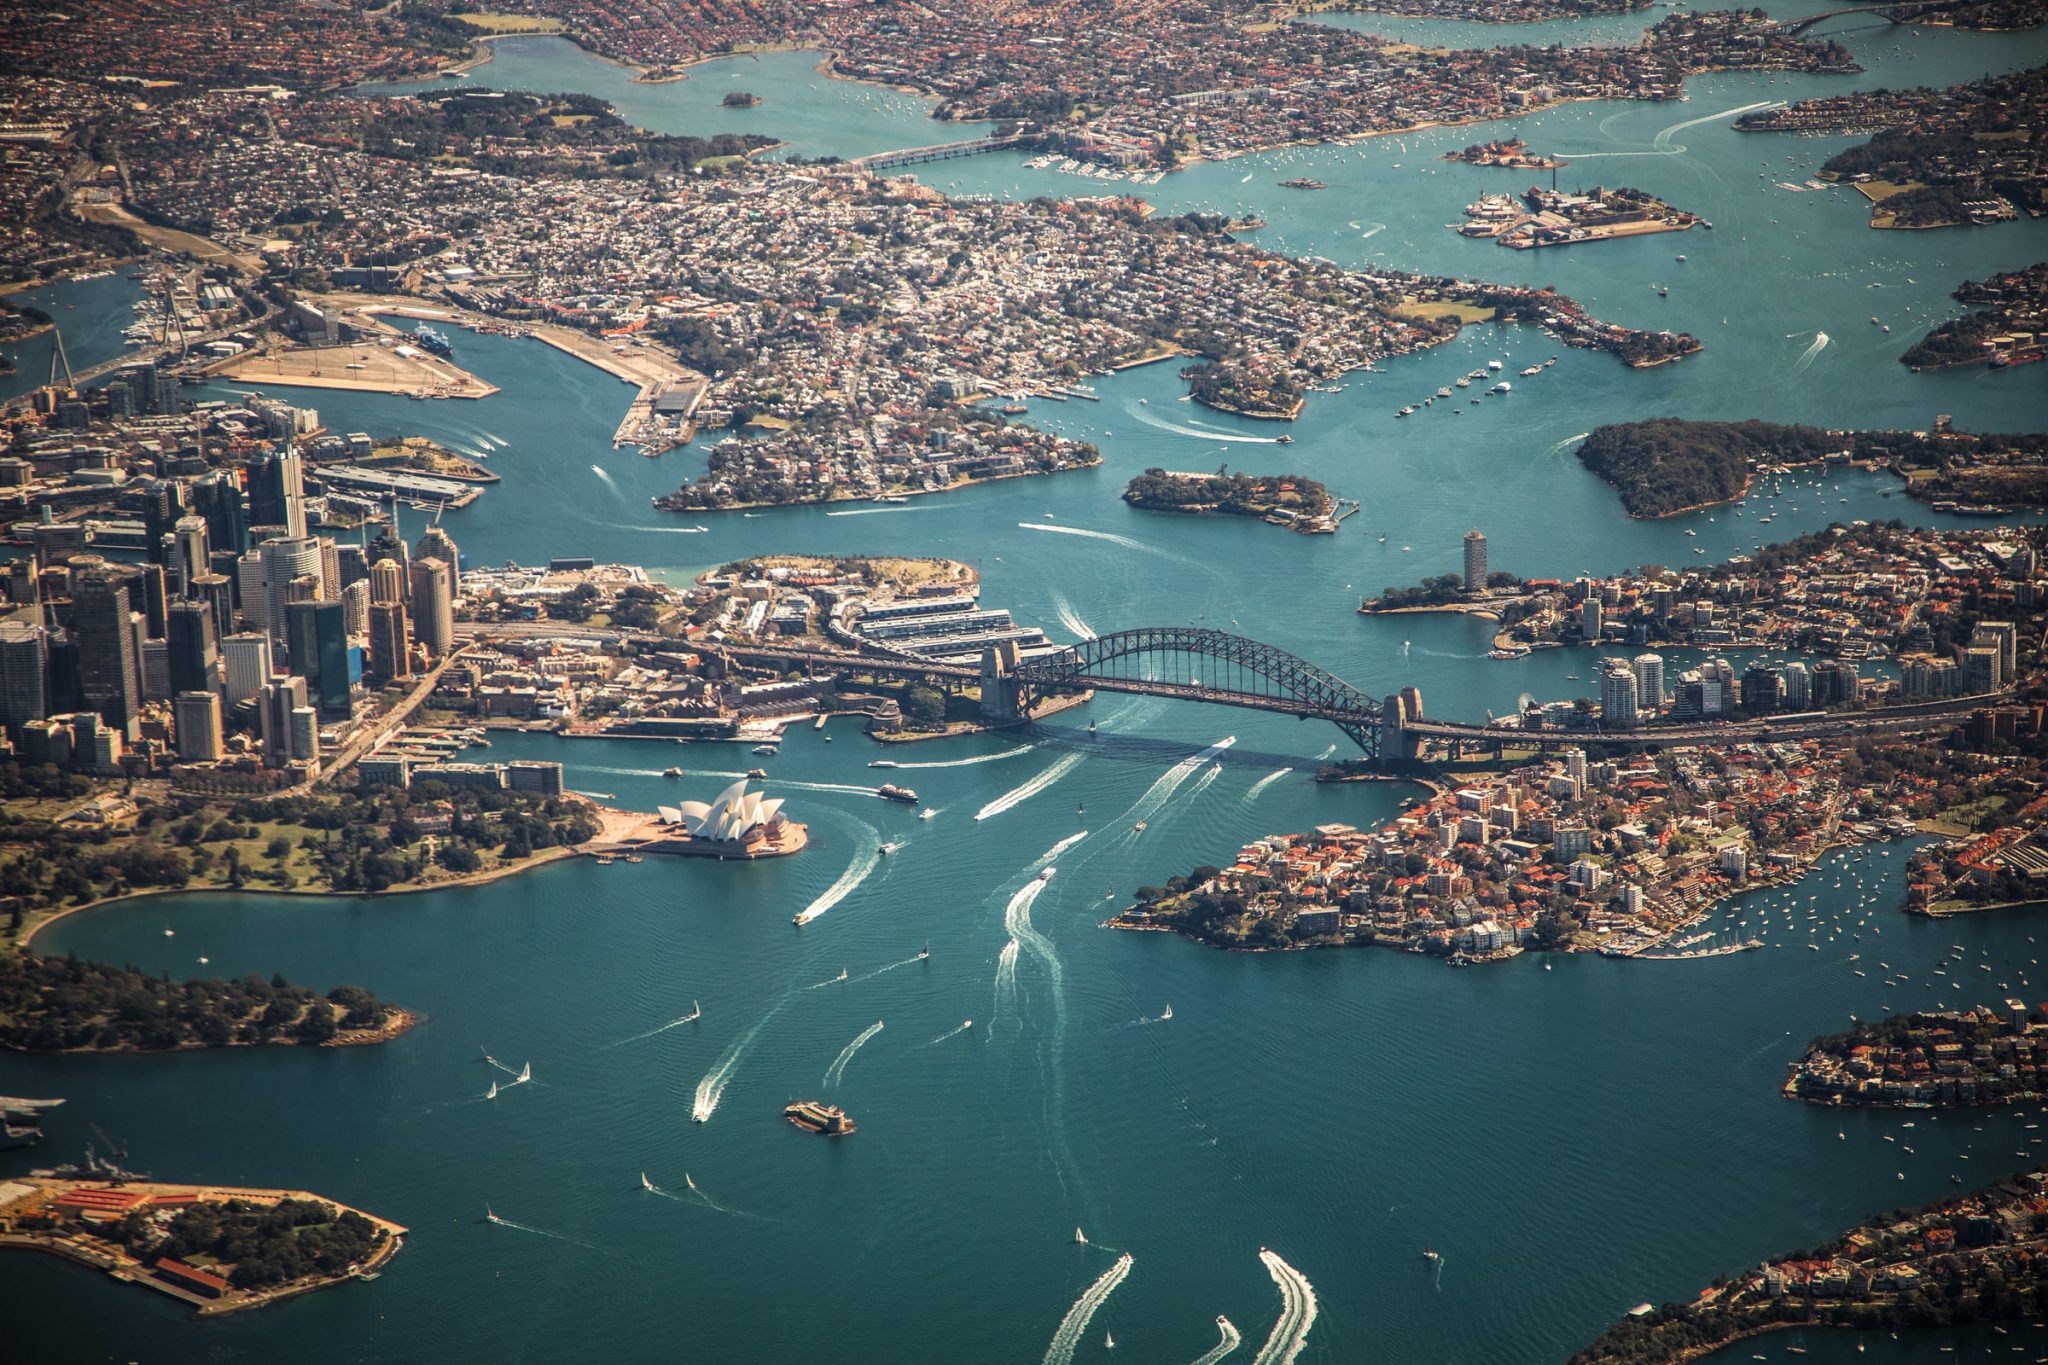 Sydney, Australia. The country has been relatively cut off since imposing travel restrictions earlier this year.